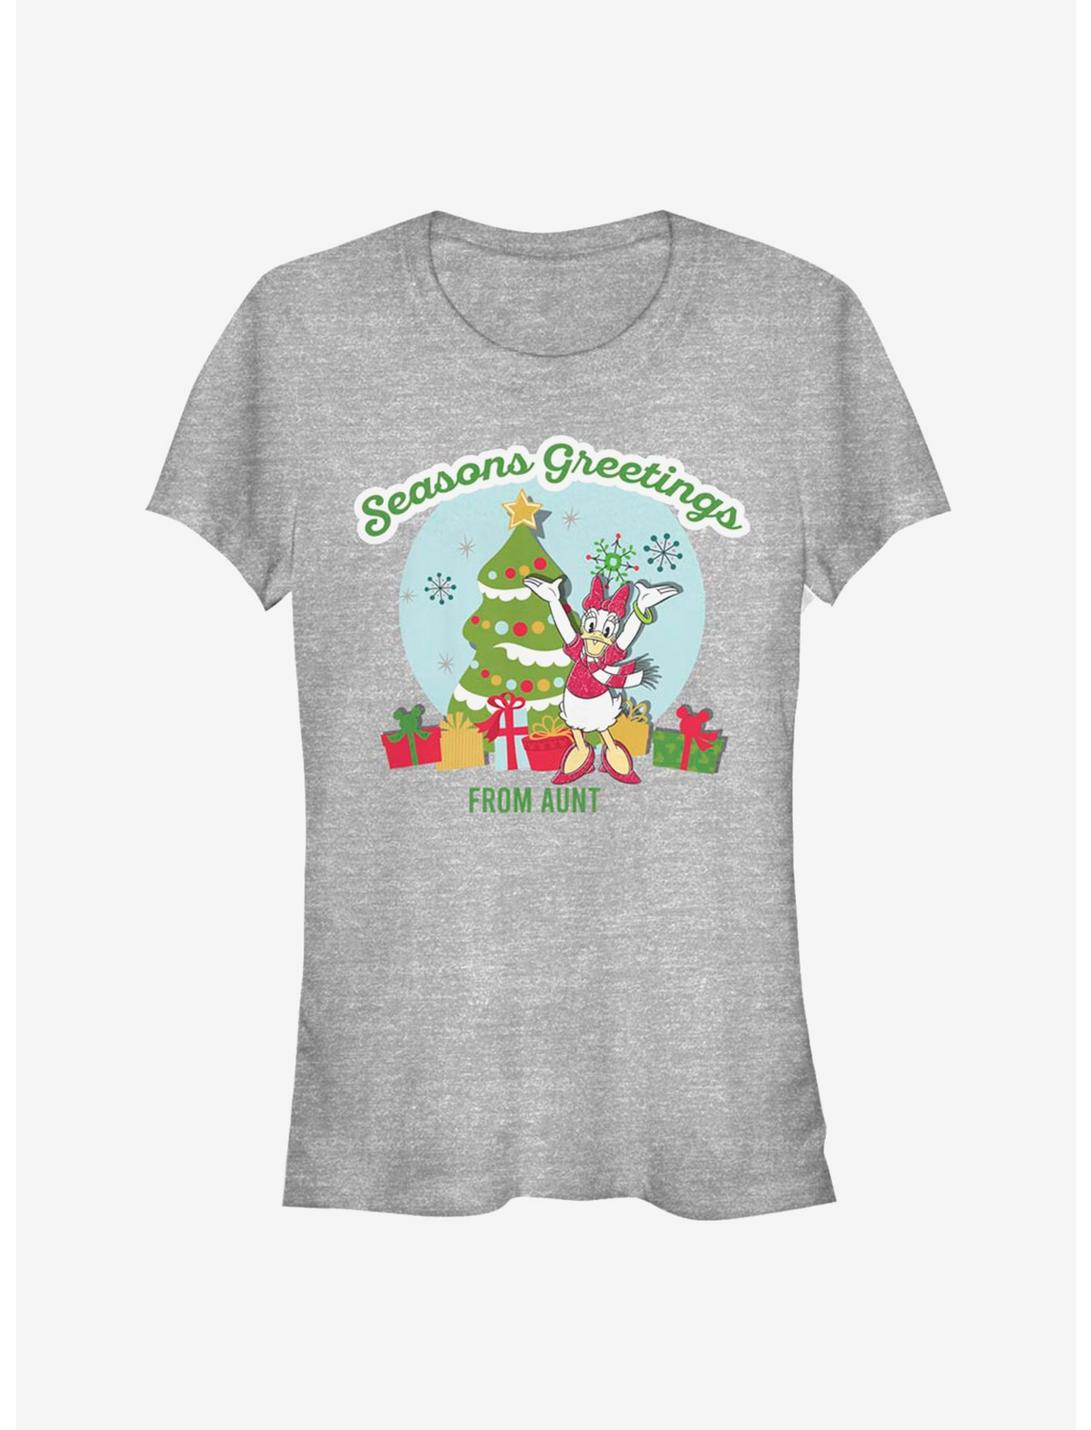 Disney Daisy Duck Holiday Seasons Greetings From Aunt Classic Girls T-Shirt, ATH HTR, hi-res